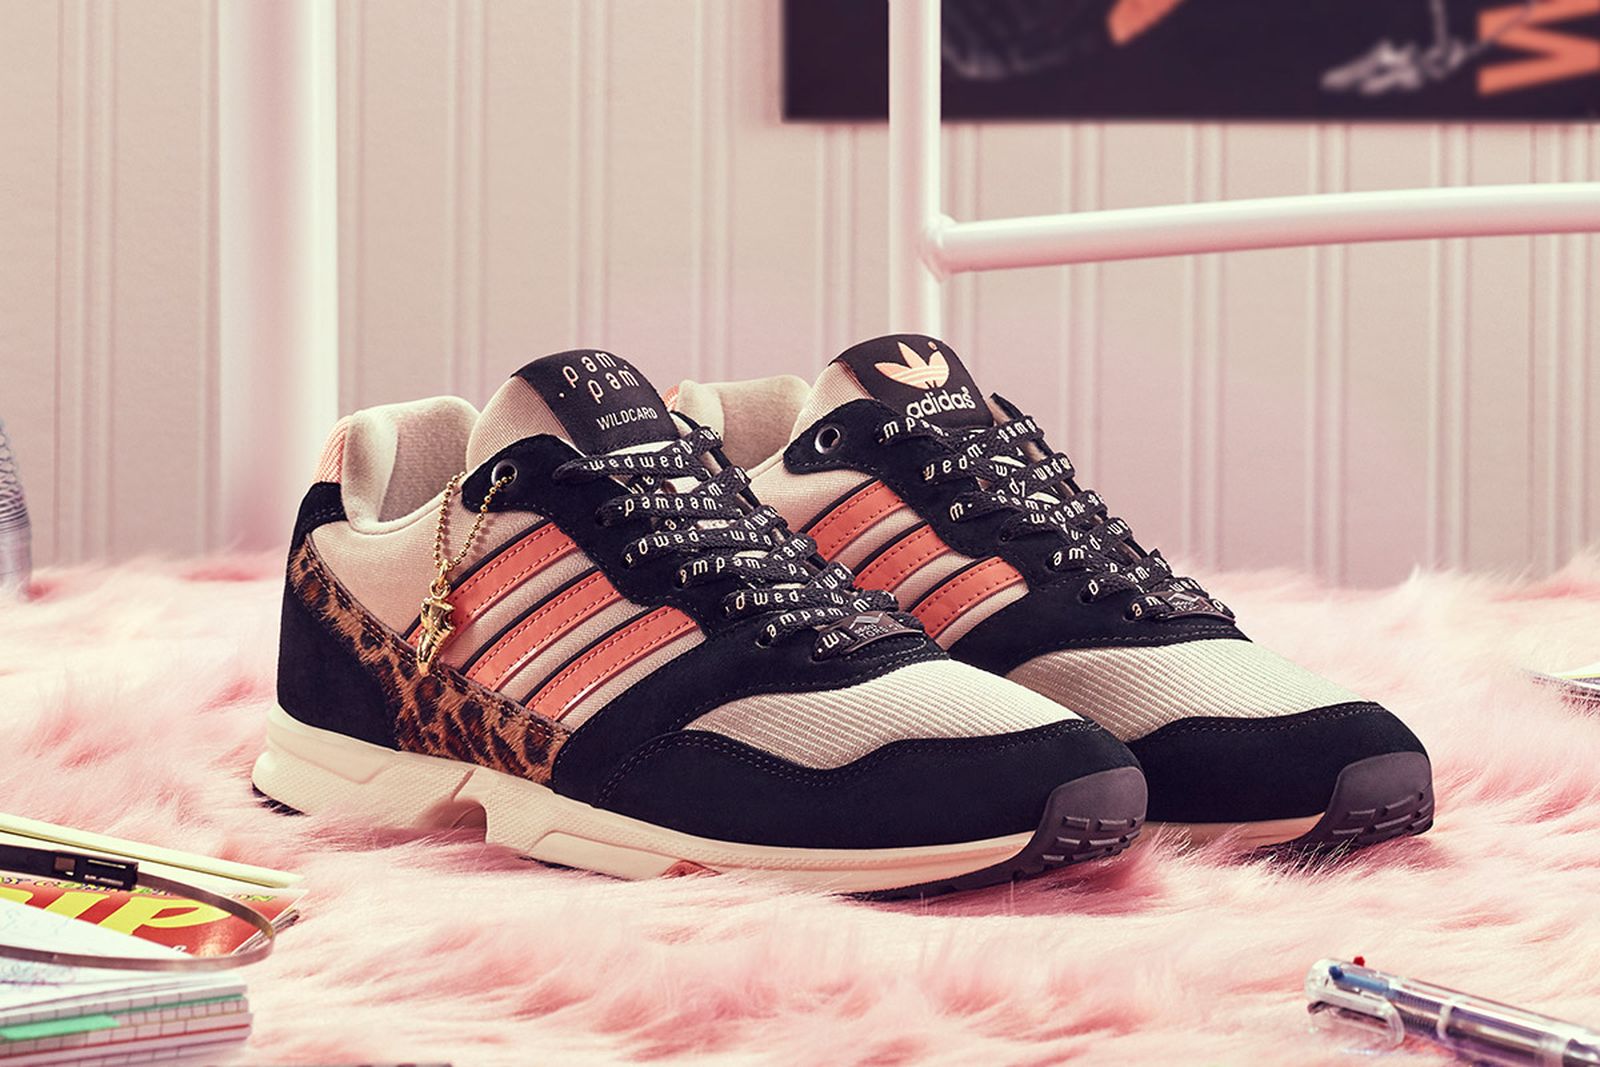 pam-pam-adidas-zx-1000-release-date-price-04